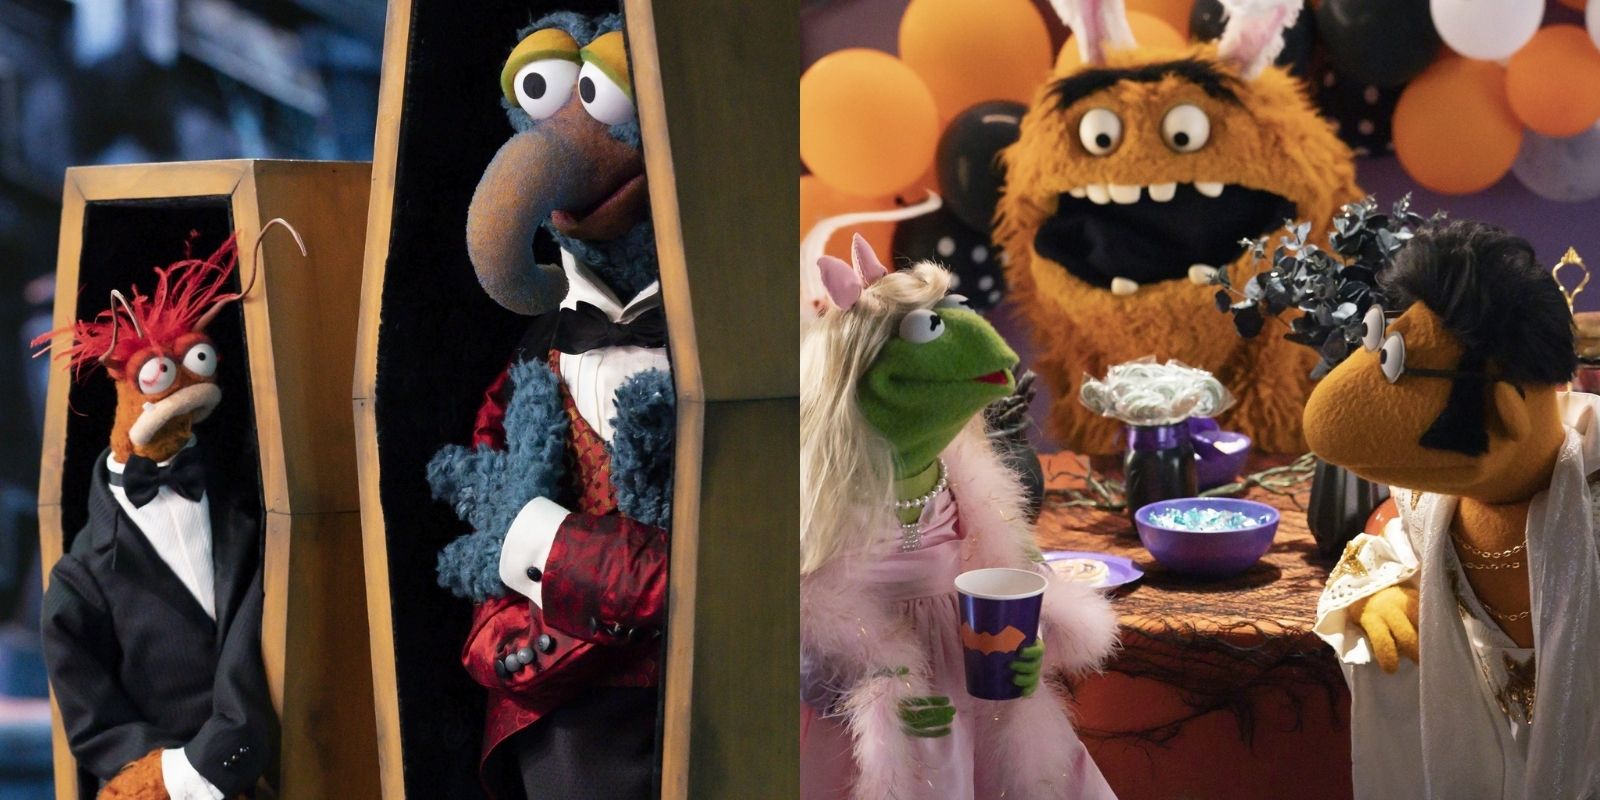 Pepe the King Prawn and Gonzo in coffins and Kermit dressed as Miss Piggy and Scooter dressed as Elvis in Muppets Haunted Mansion